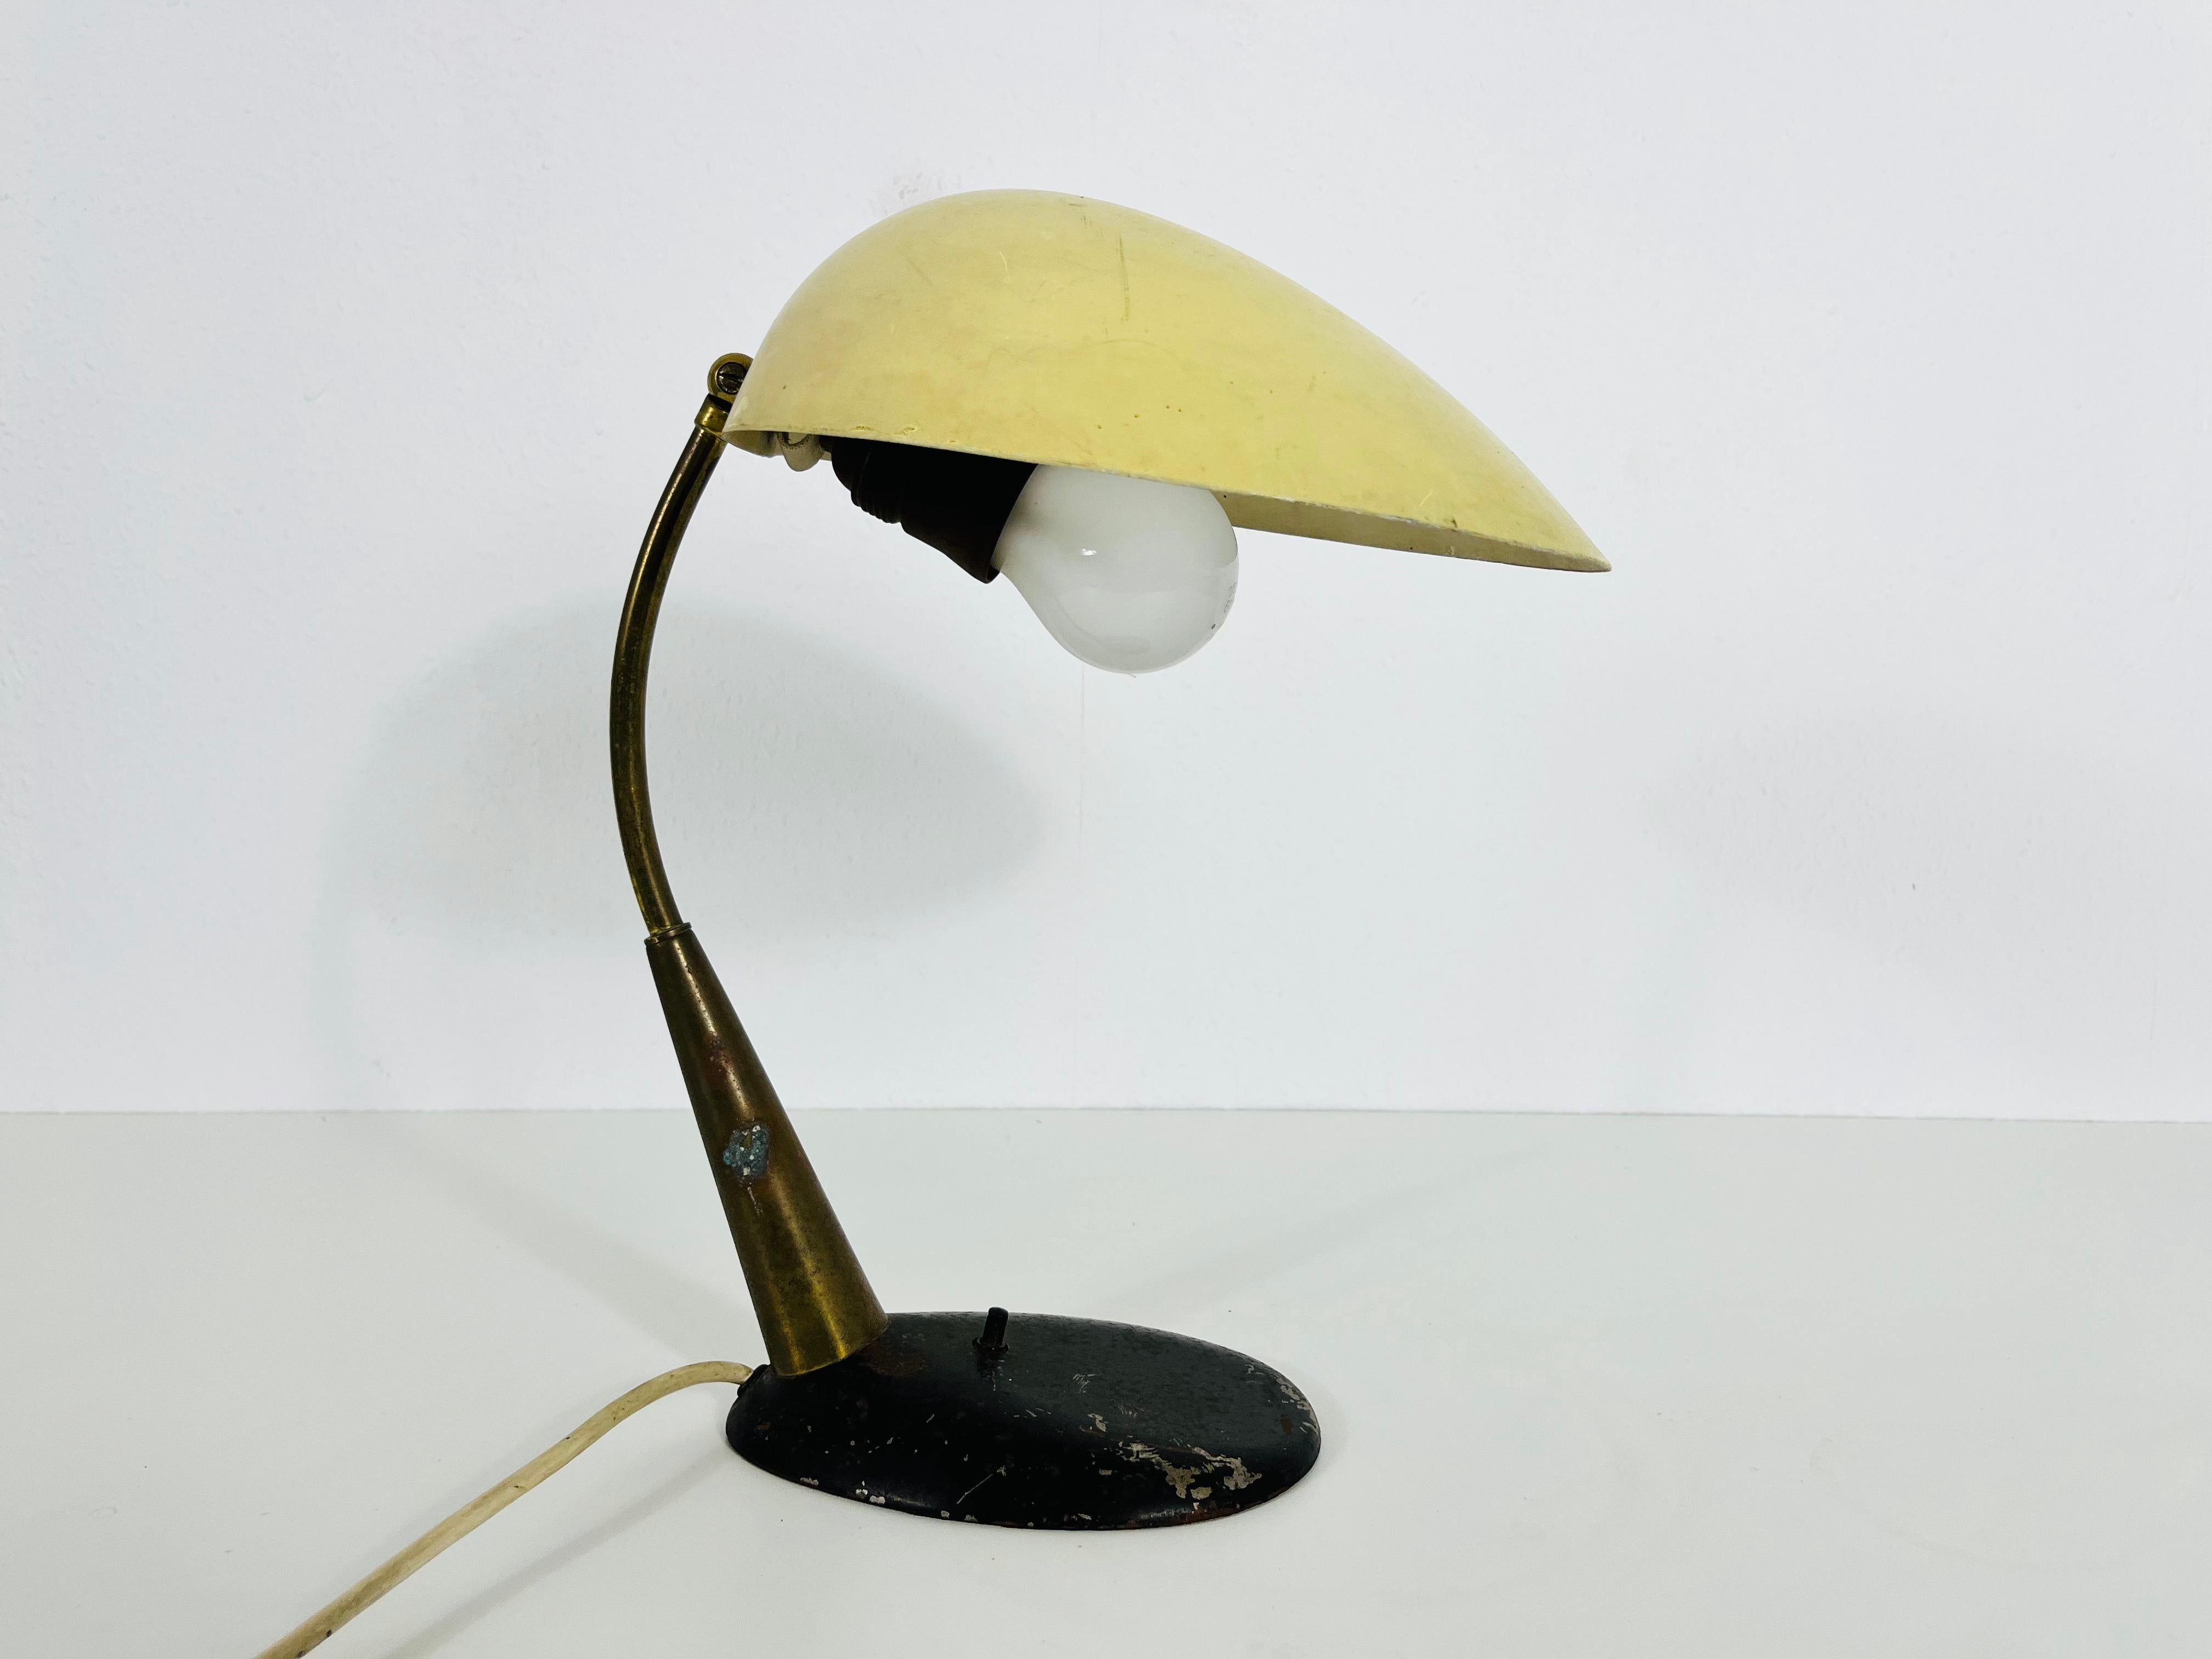 An Italian table lamp made in the 1960s. The lighting has an exceptional design.

The light requires one E27 (US E26) light bulb. Works with both 120/220V. Good vintage condition.

Free worldwide express shipping.